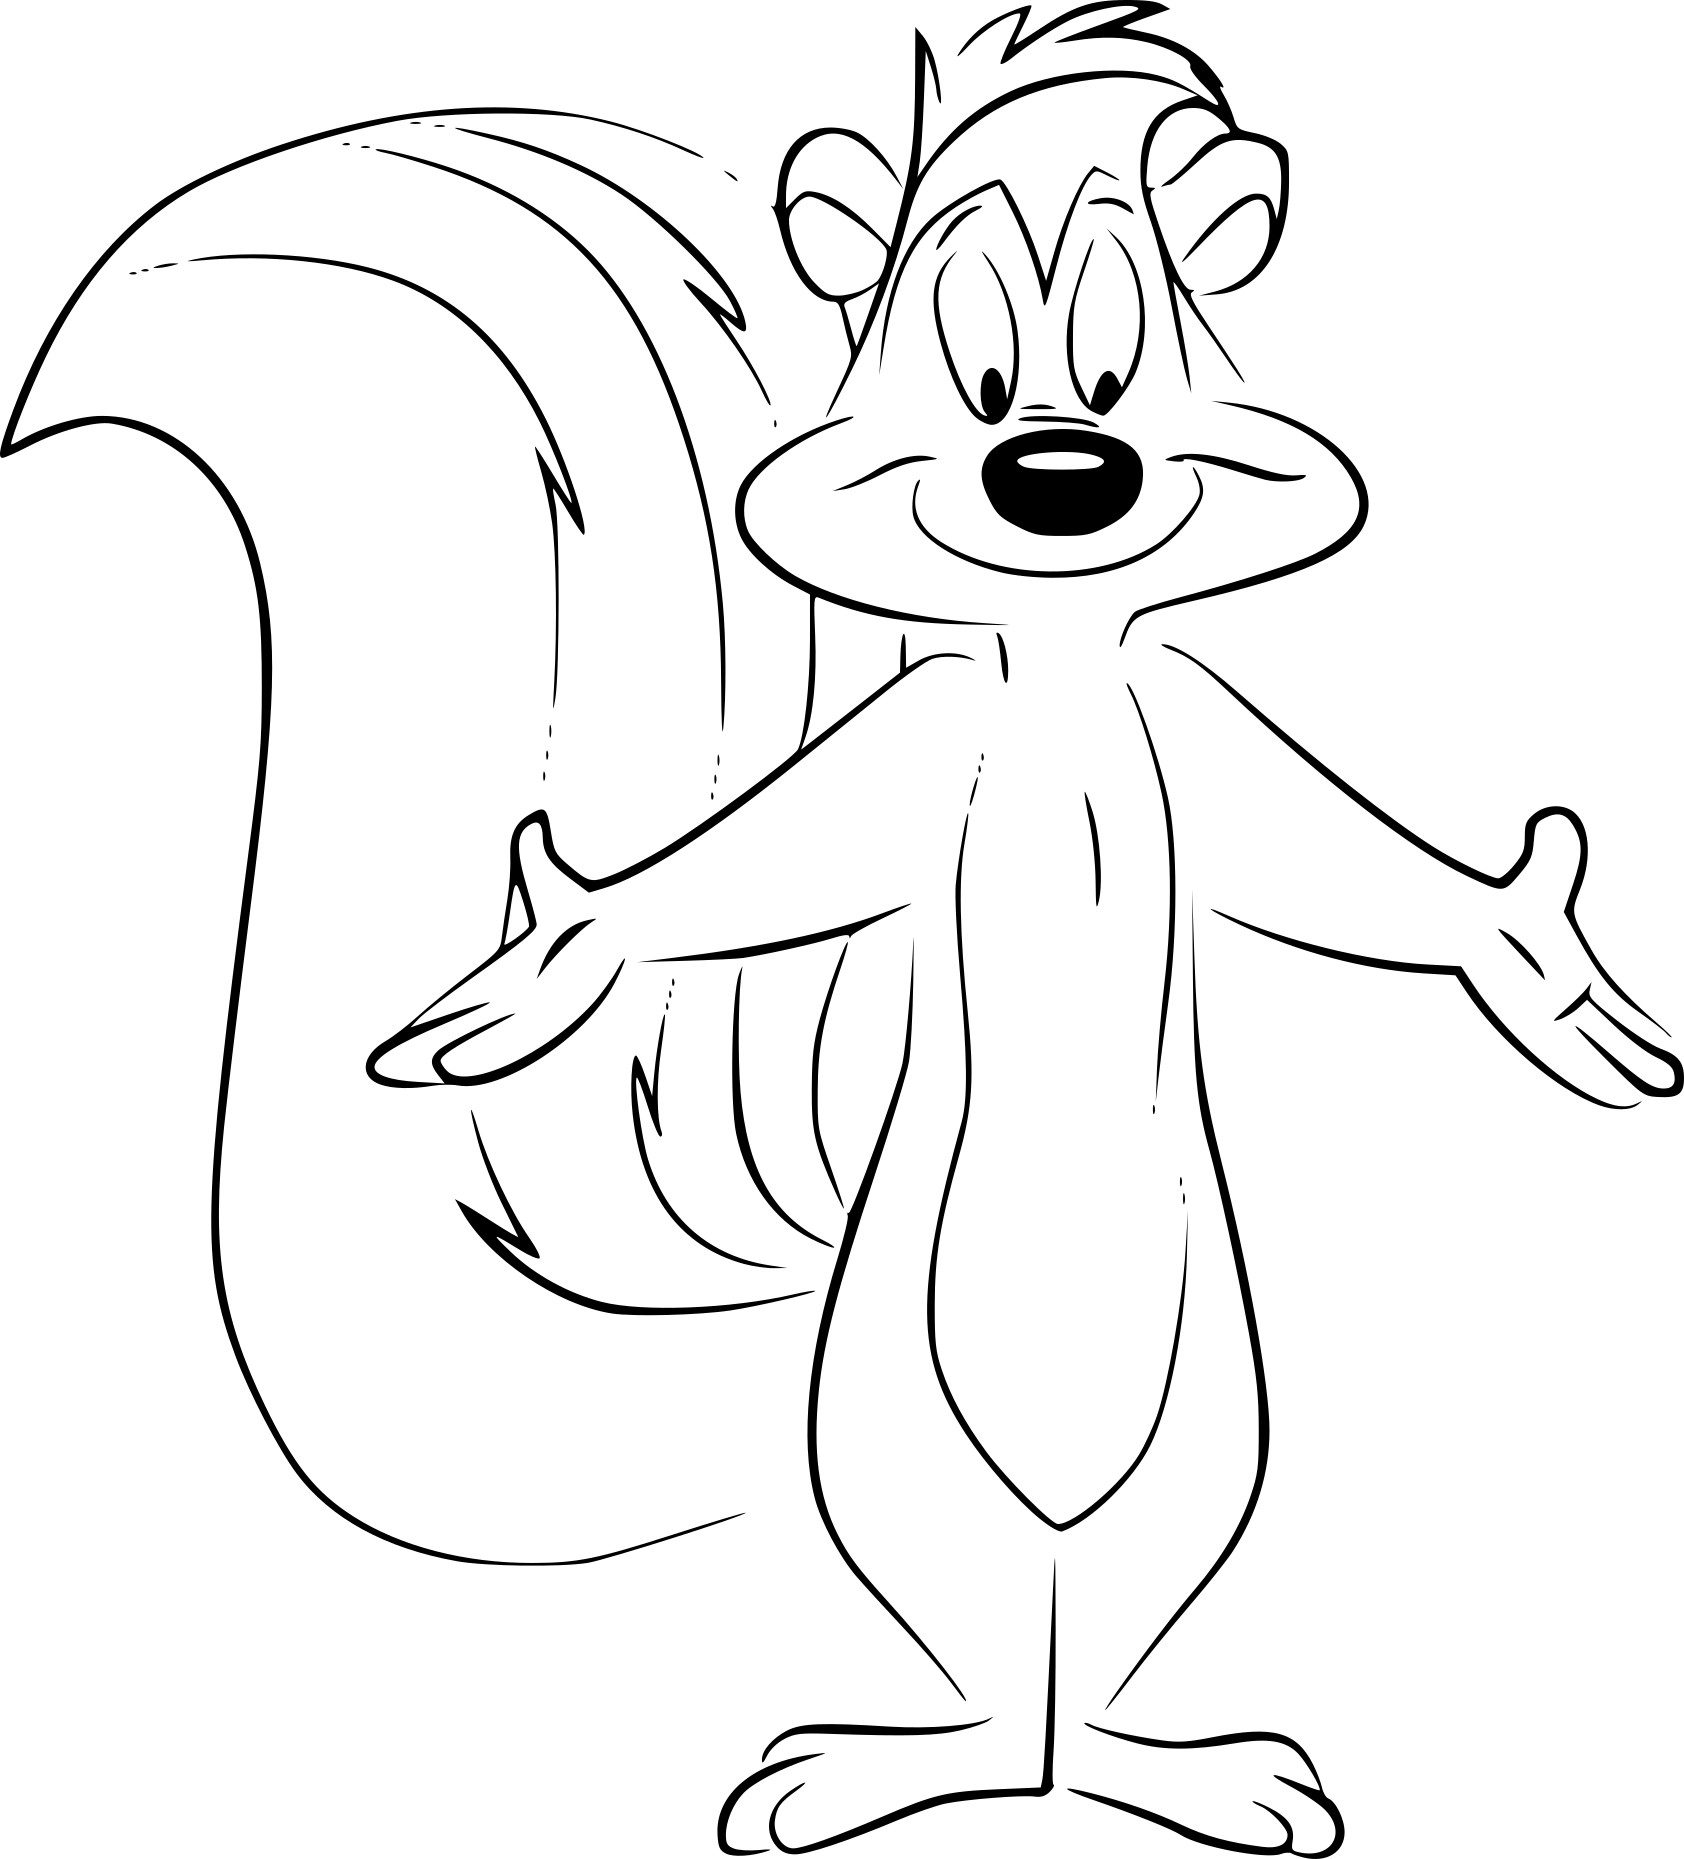 Pepe The Skunk coloring page